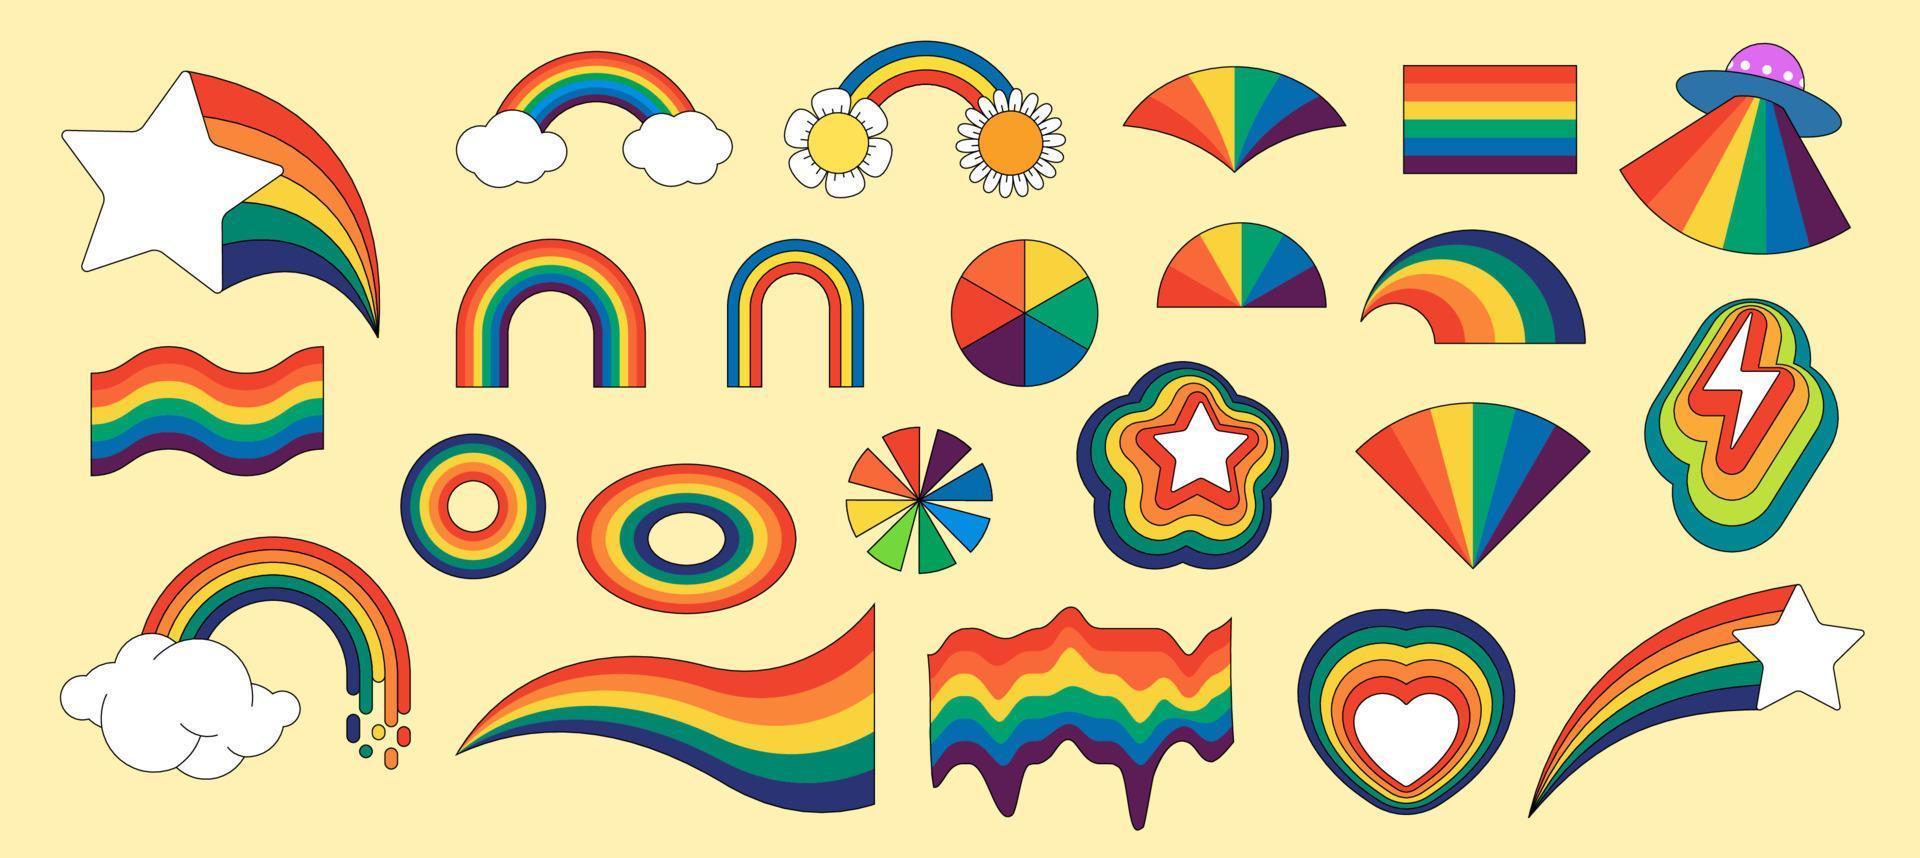 Retro groovy rainbow hipster set. Psychedelic hippie rainbows collection. Vintage hippy style crazy various abstract iridescent arch. Trendy pop culture colorful bright design elements. Vector eps